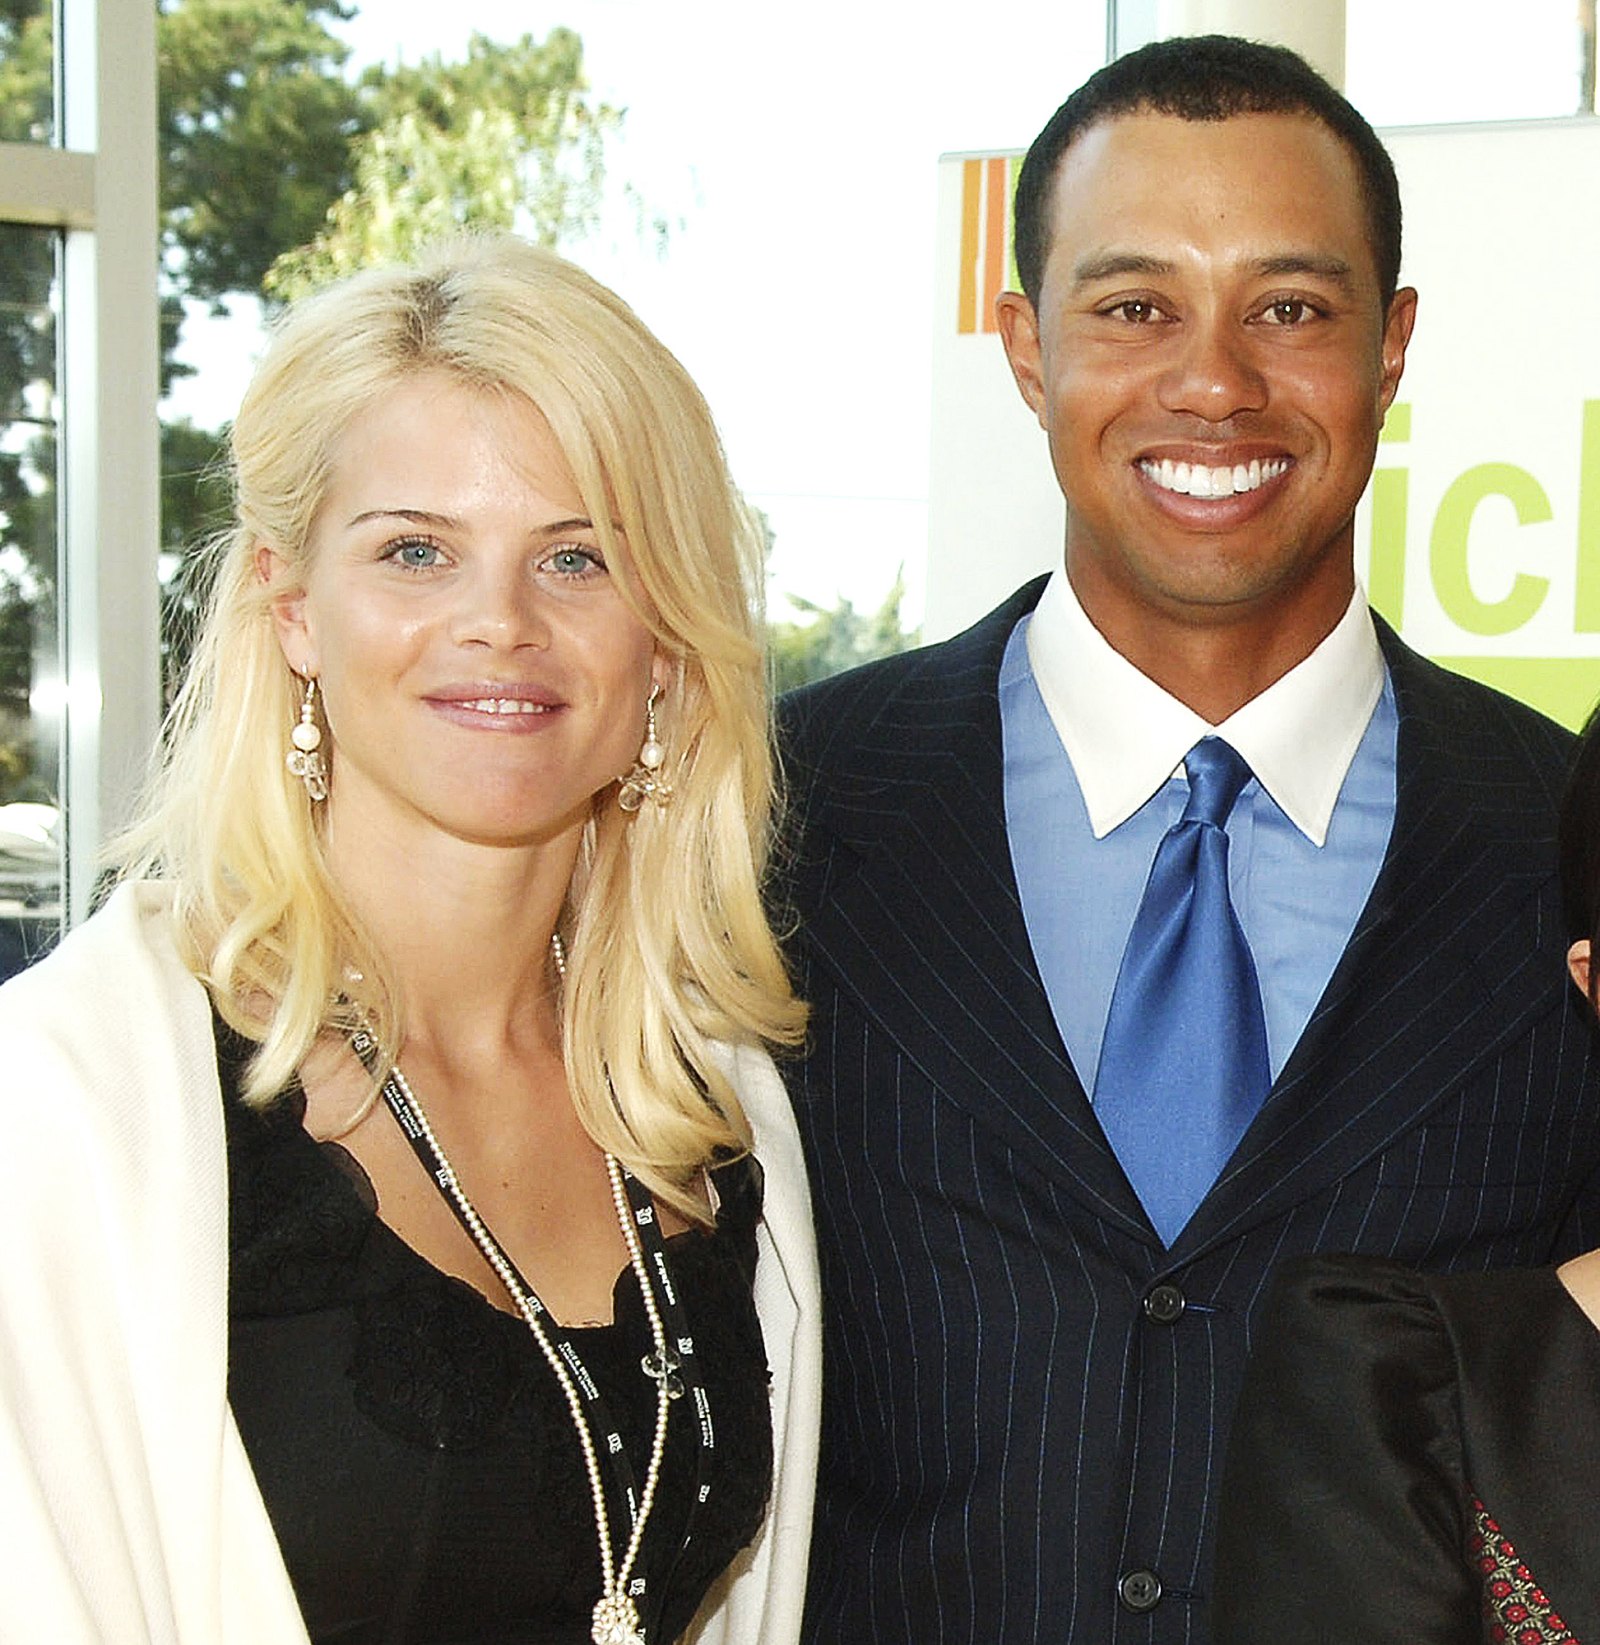 Tiger Woods, Elin Nordegren's Quotes About Their Relationship